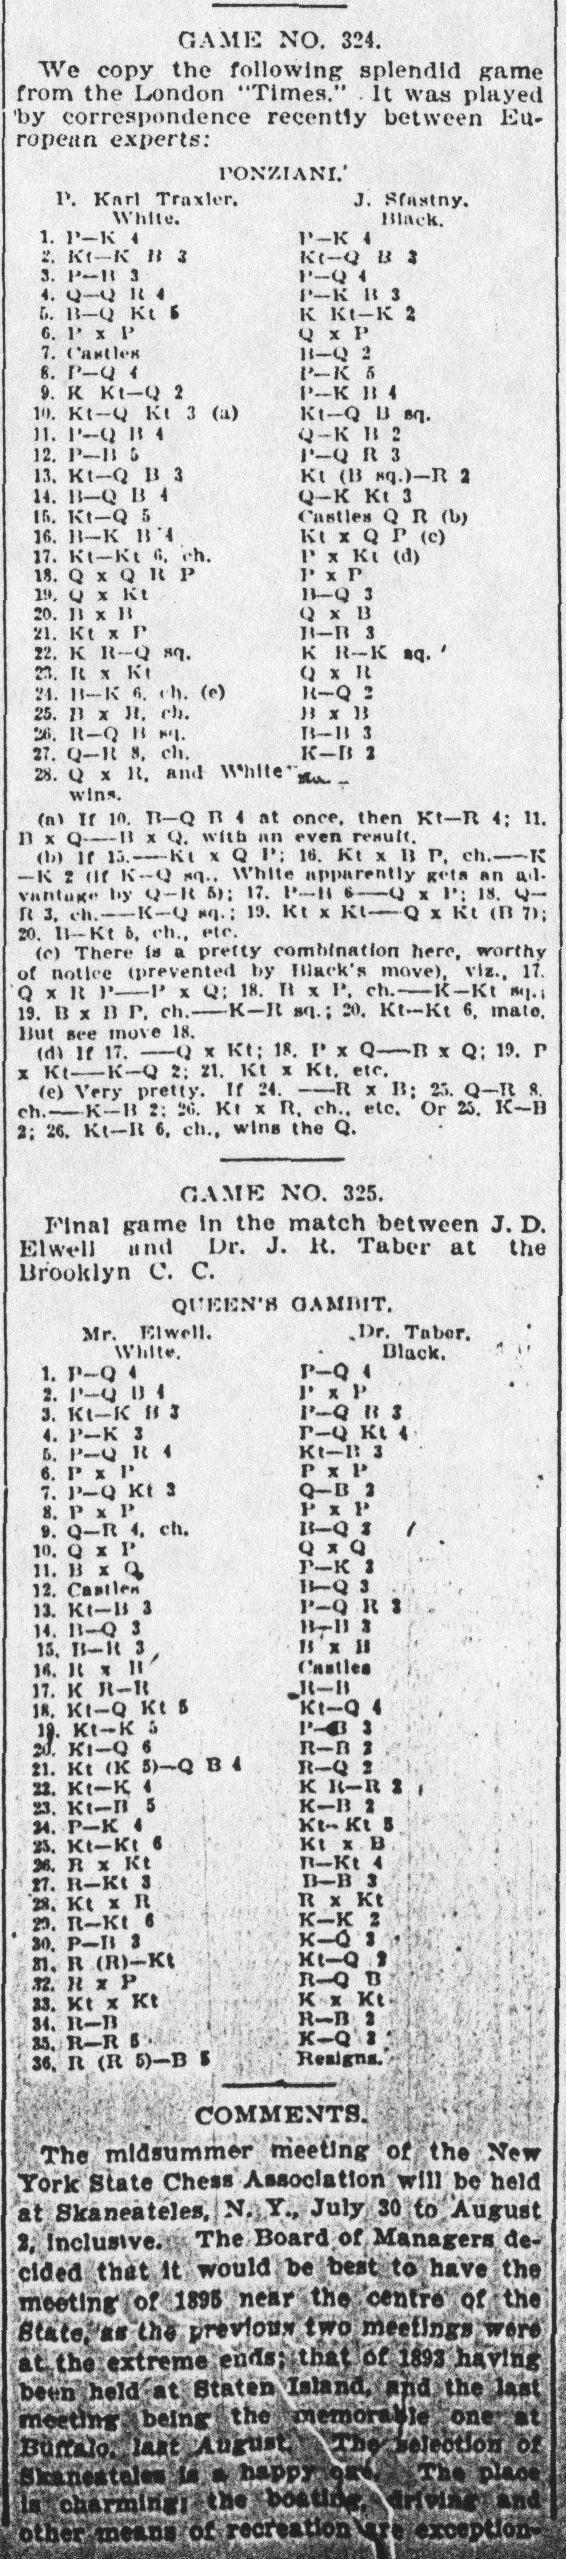 1895.06.22-02 Brooklyn Daily Standard-Union.png